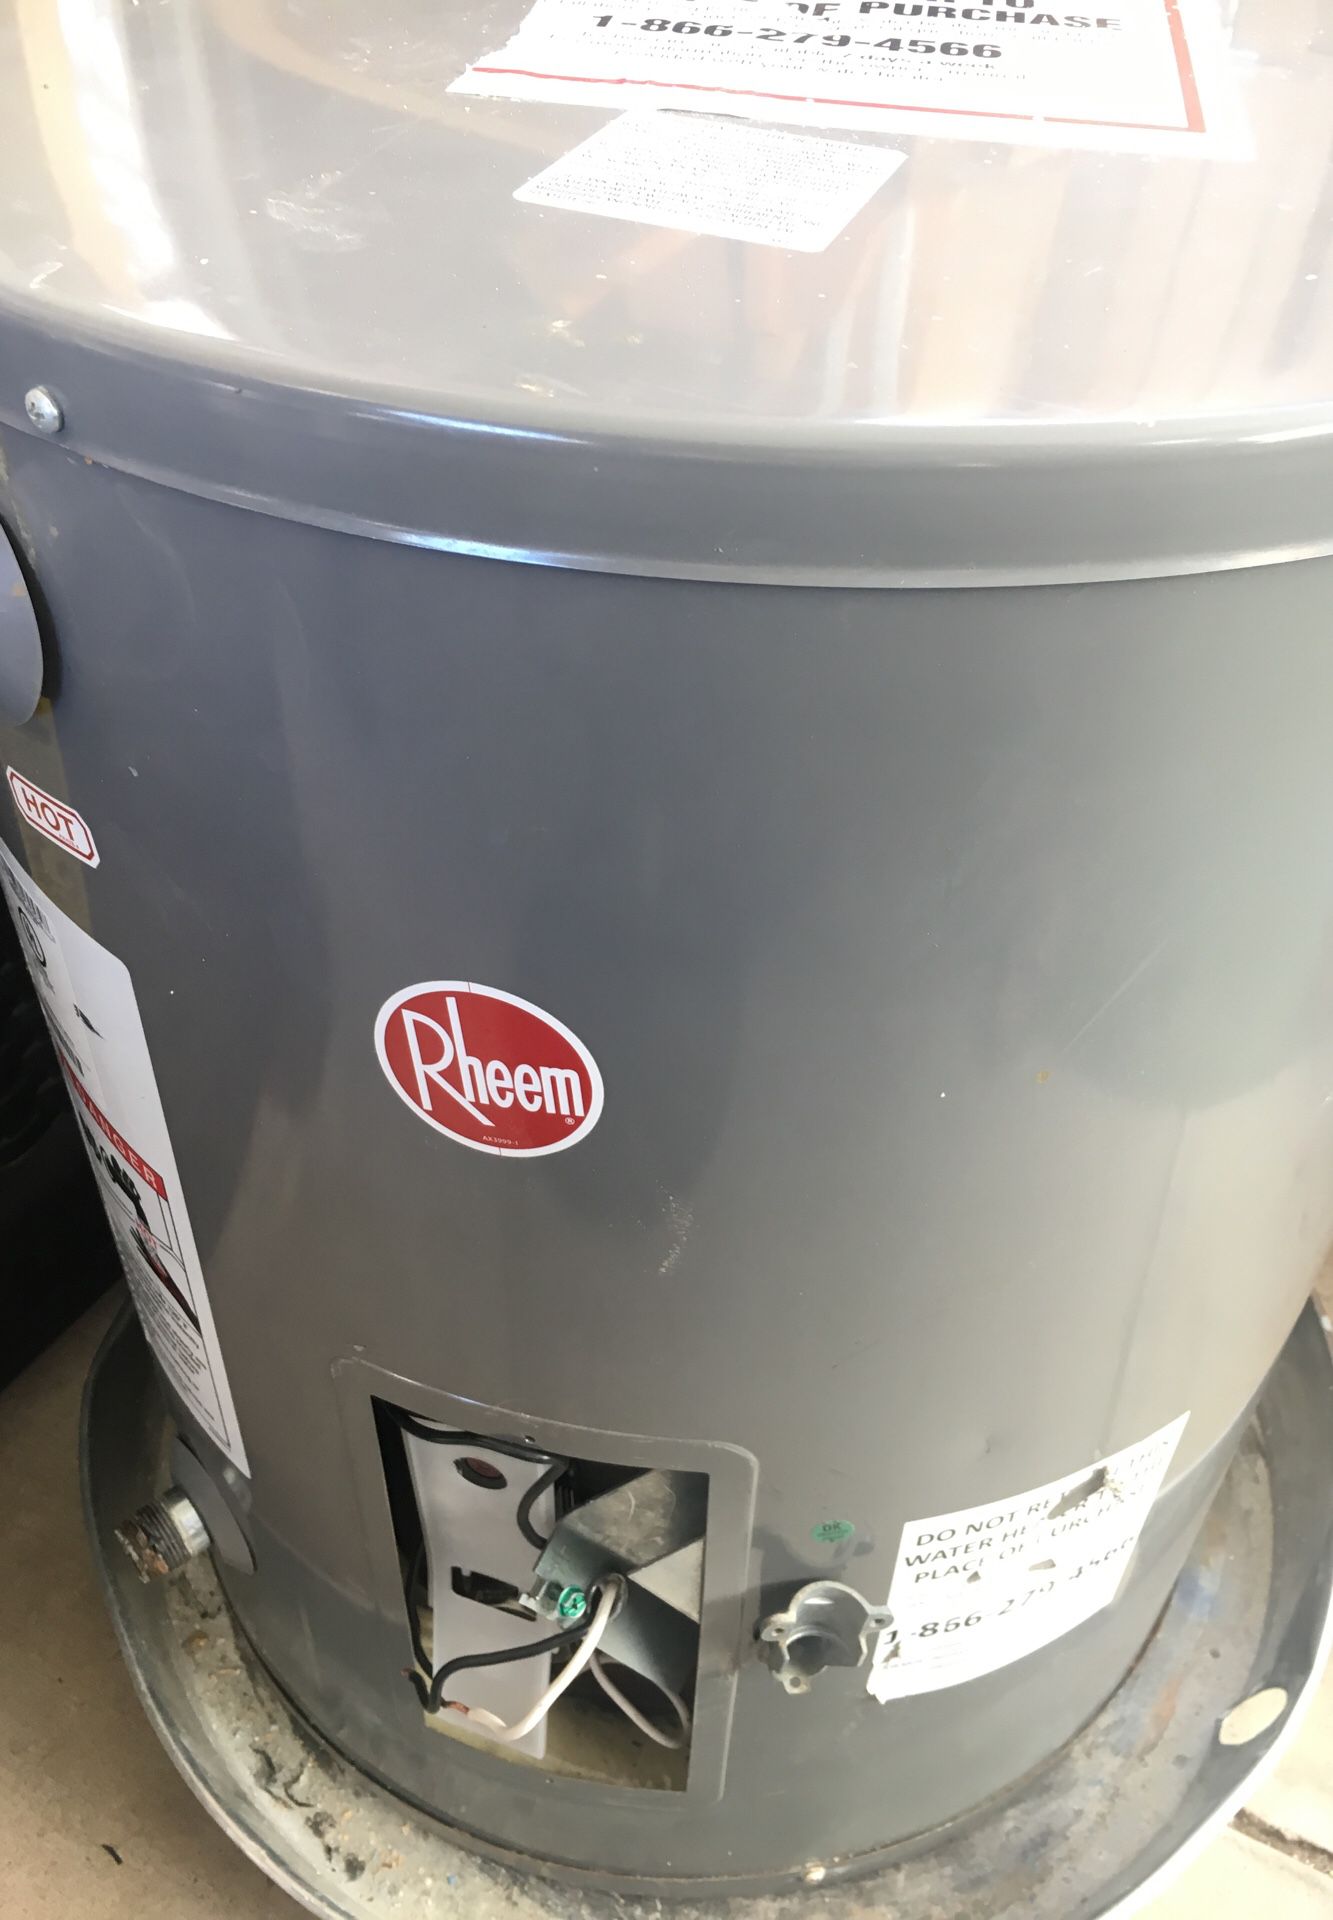 20 gallon electric water heater with pan